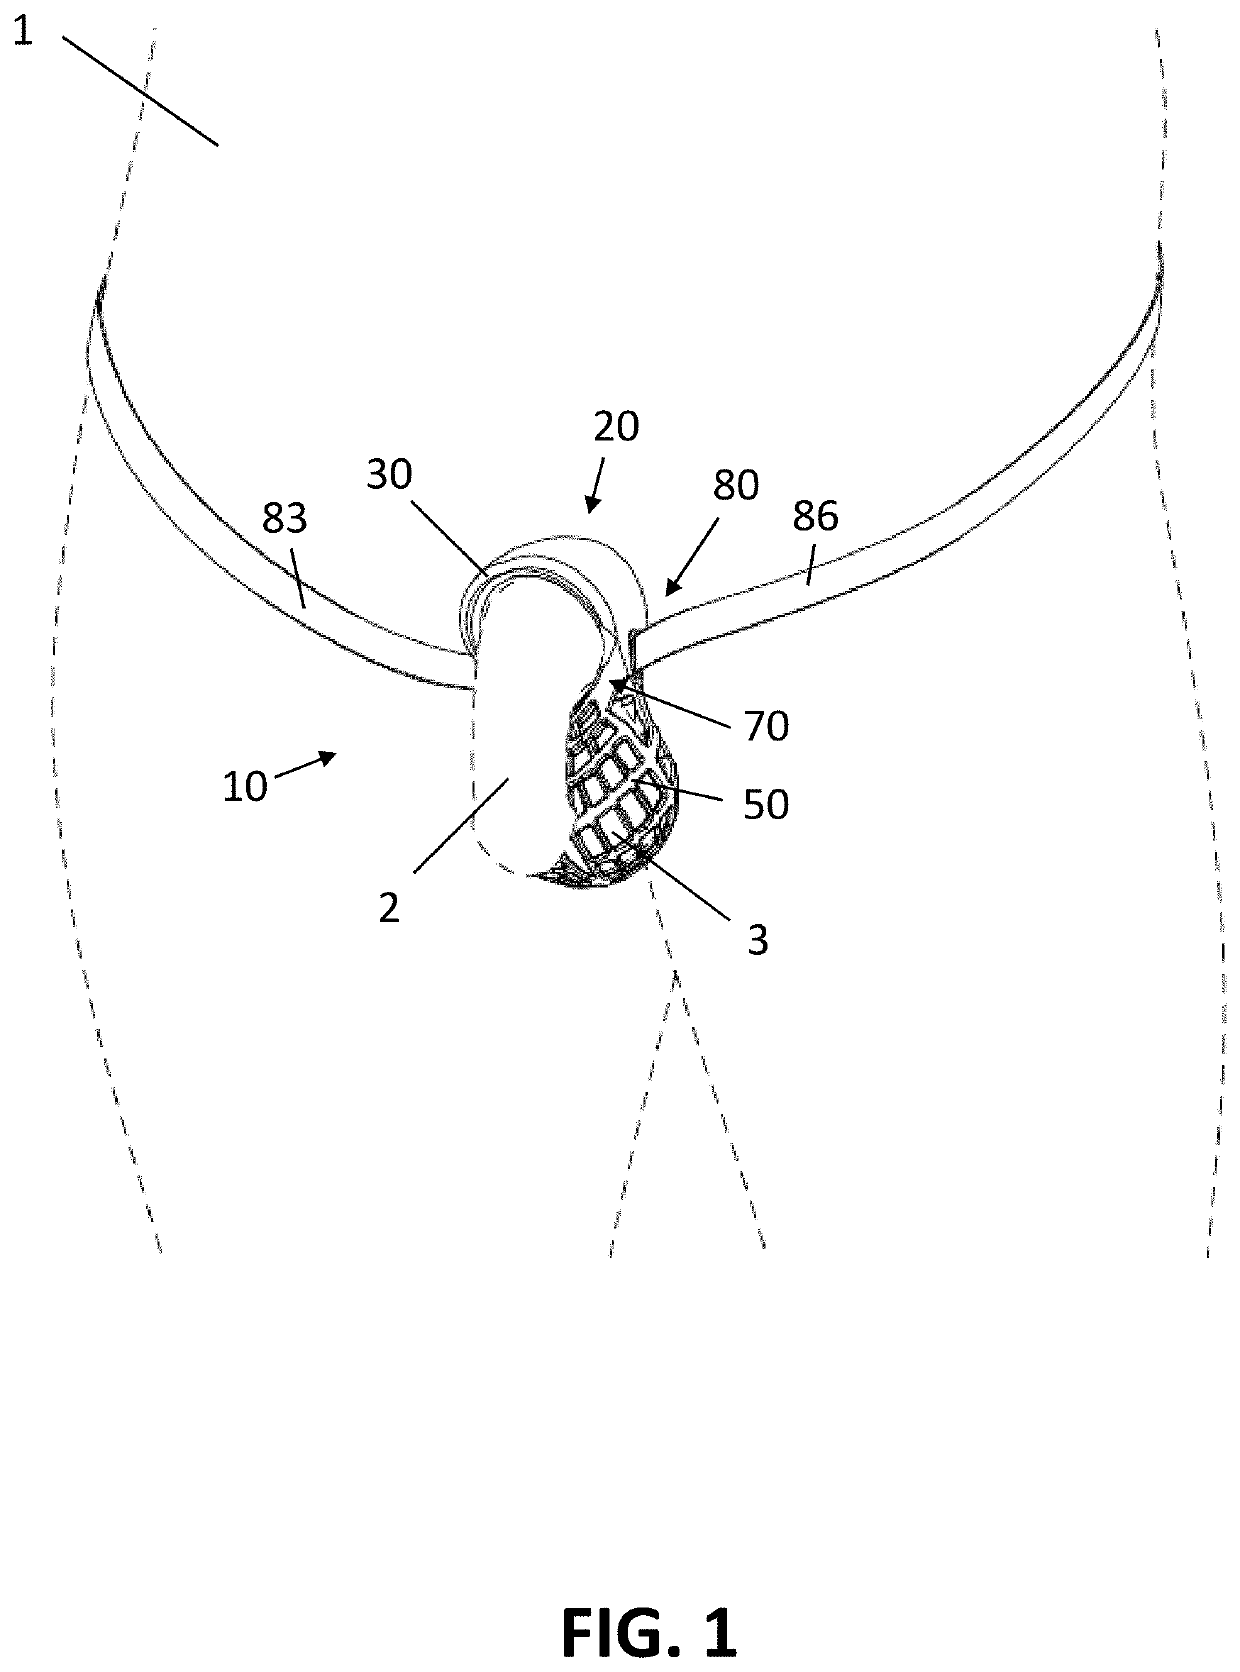 Undergarment support apparatus and systems